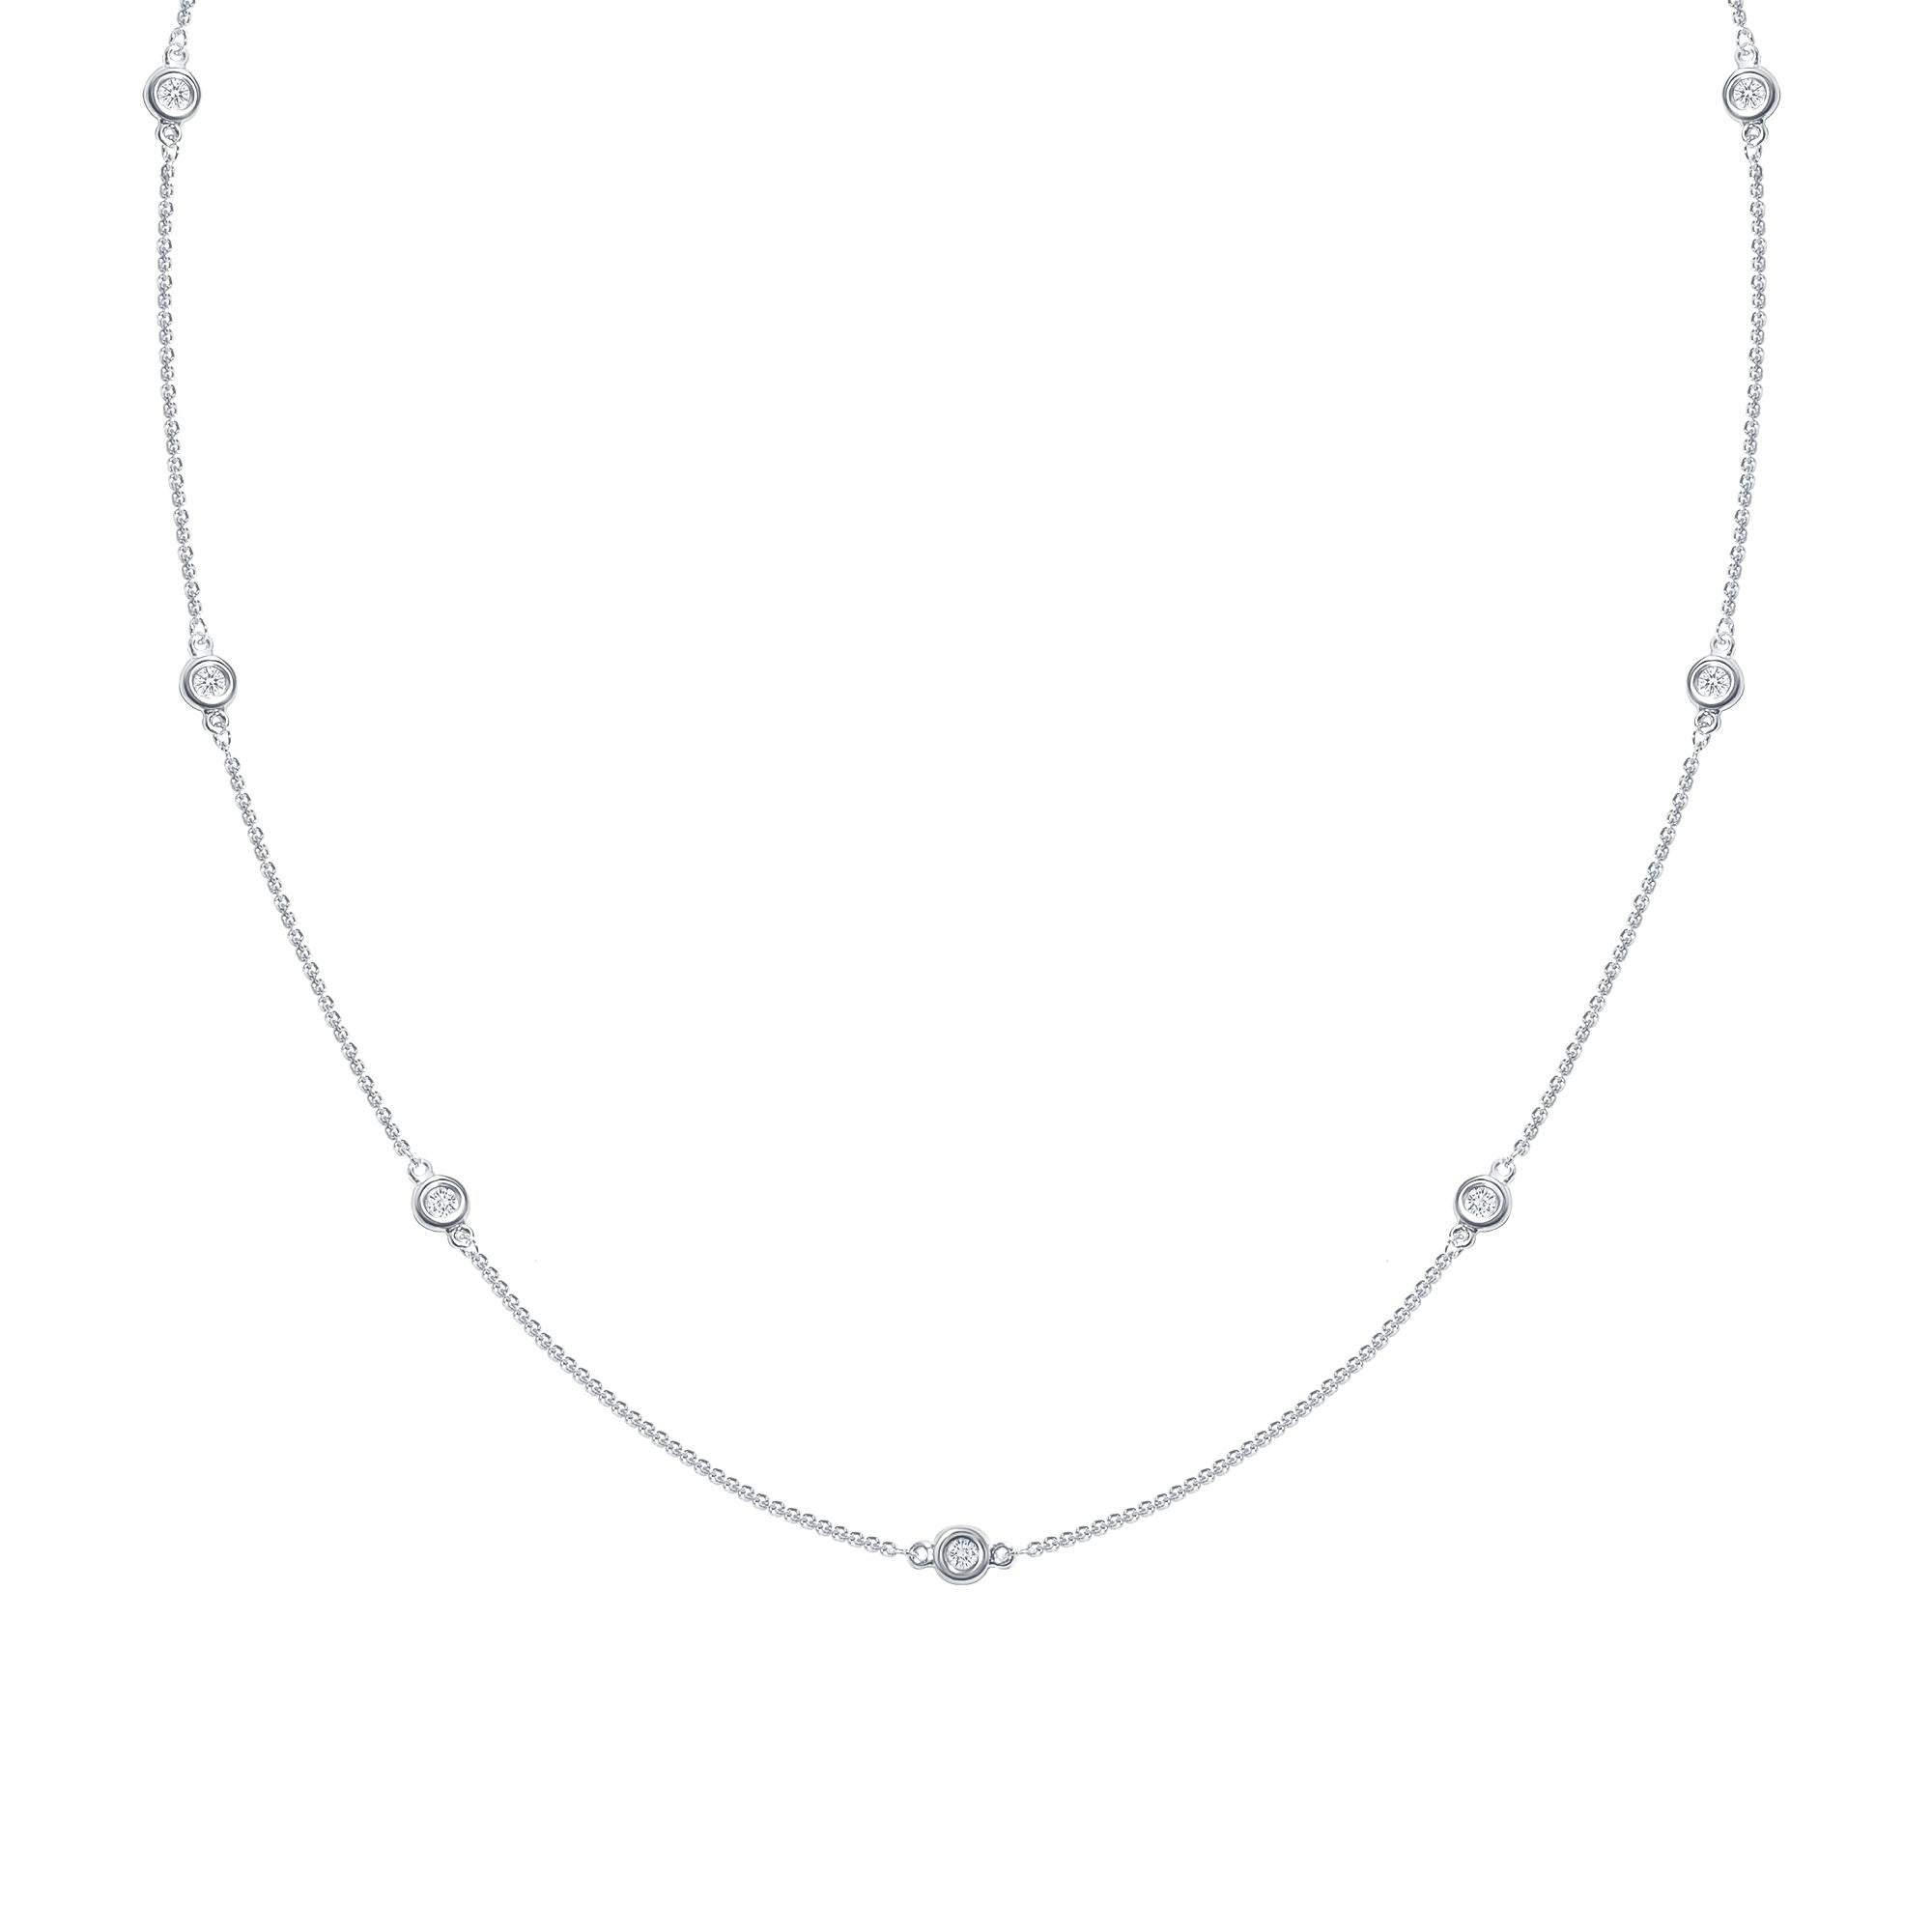 Eight elegant round diamonds set in a bezel setting along a 14k gold chain necklace.

Gold: 14K Gold
Number of Diamonds: Eight
Gold Color: White Gold
Carat: 1 Carat
Necklace Length: 18 Inches
Diamond Clarity: VS
Diamond Color: F
Chain Type: